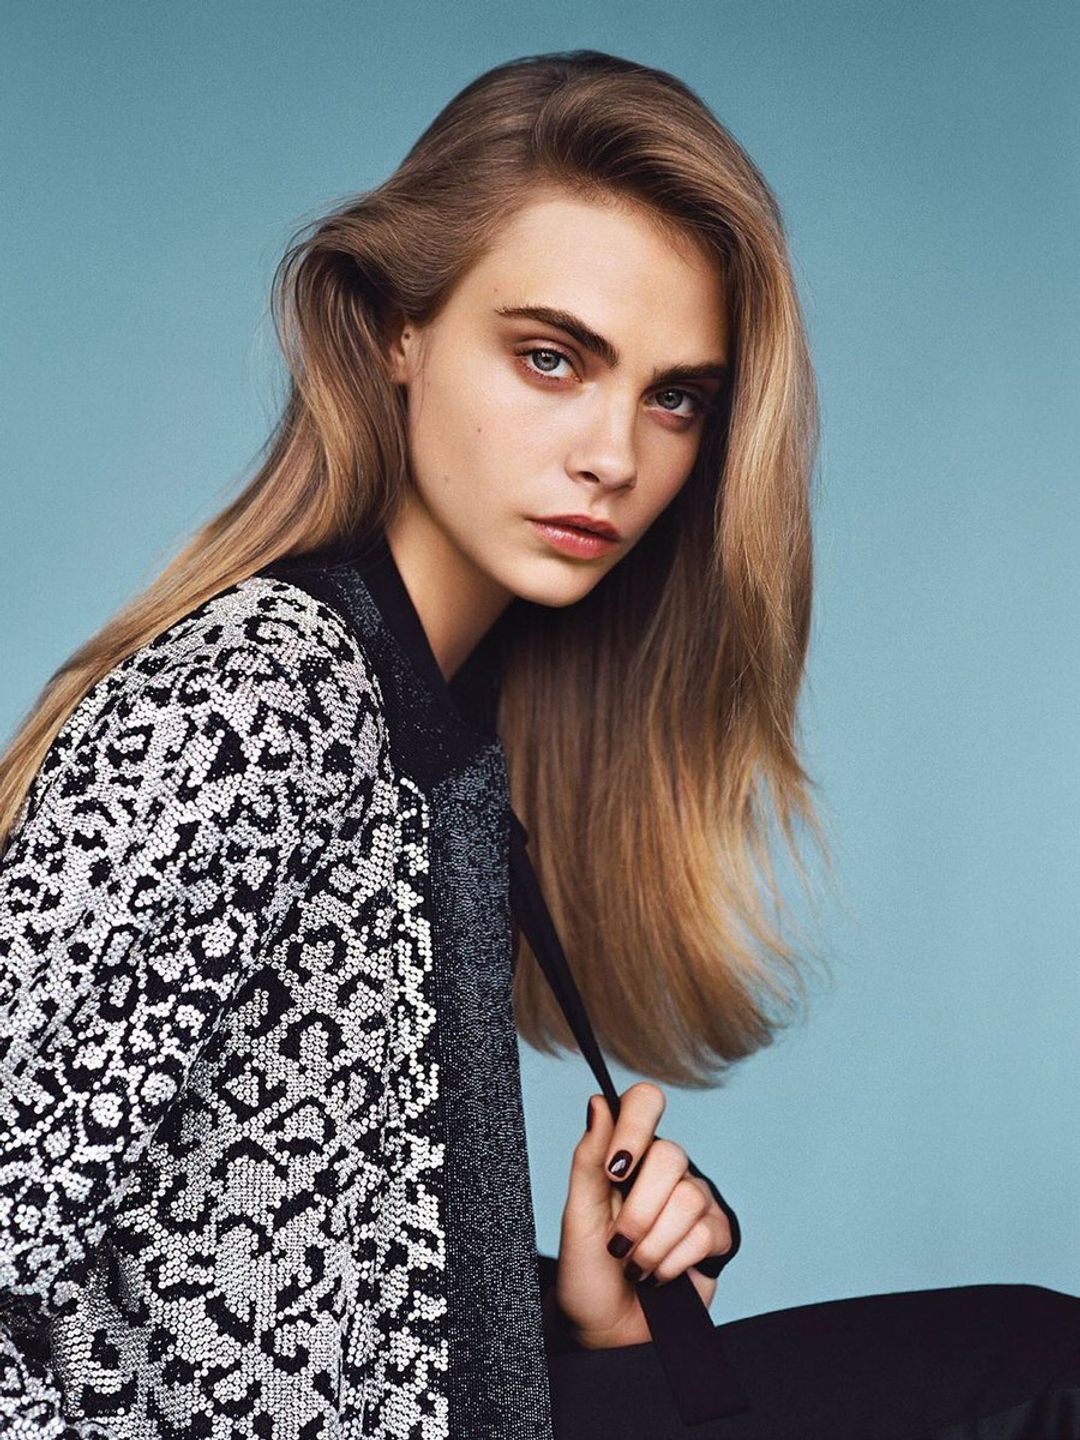 Cara Delevingne in her youth